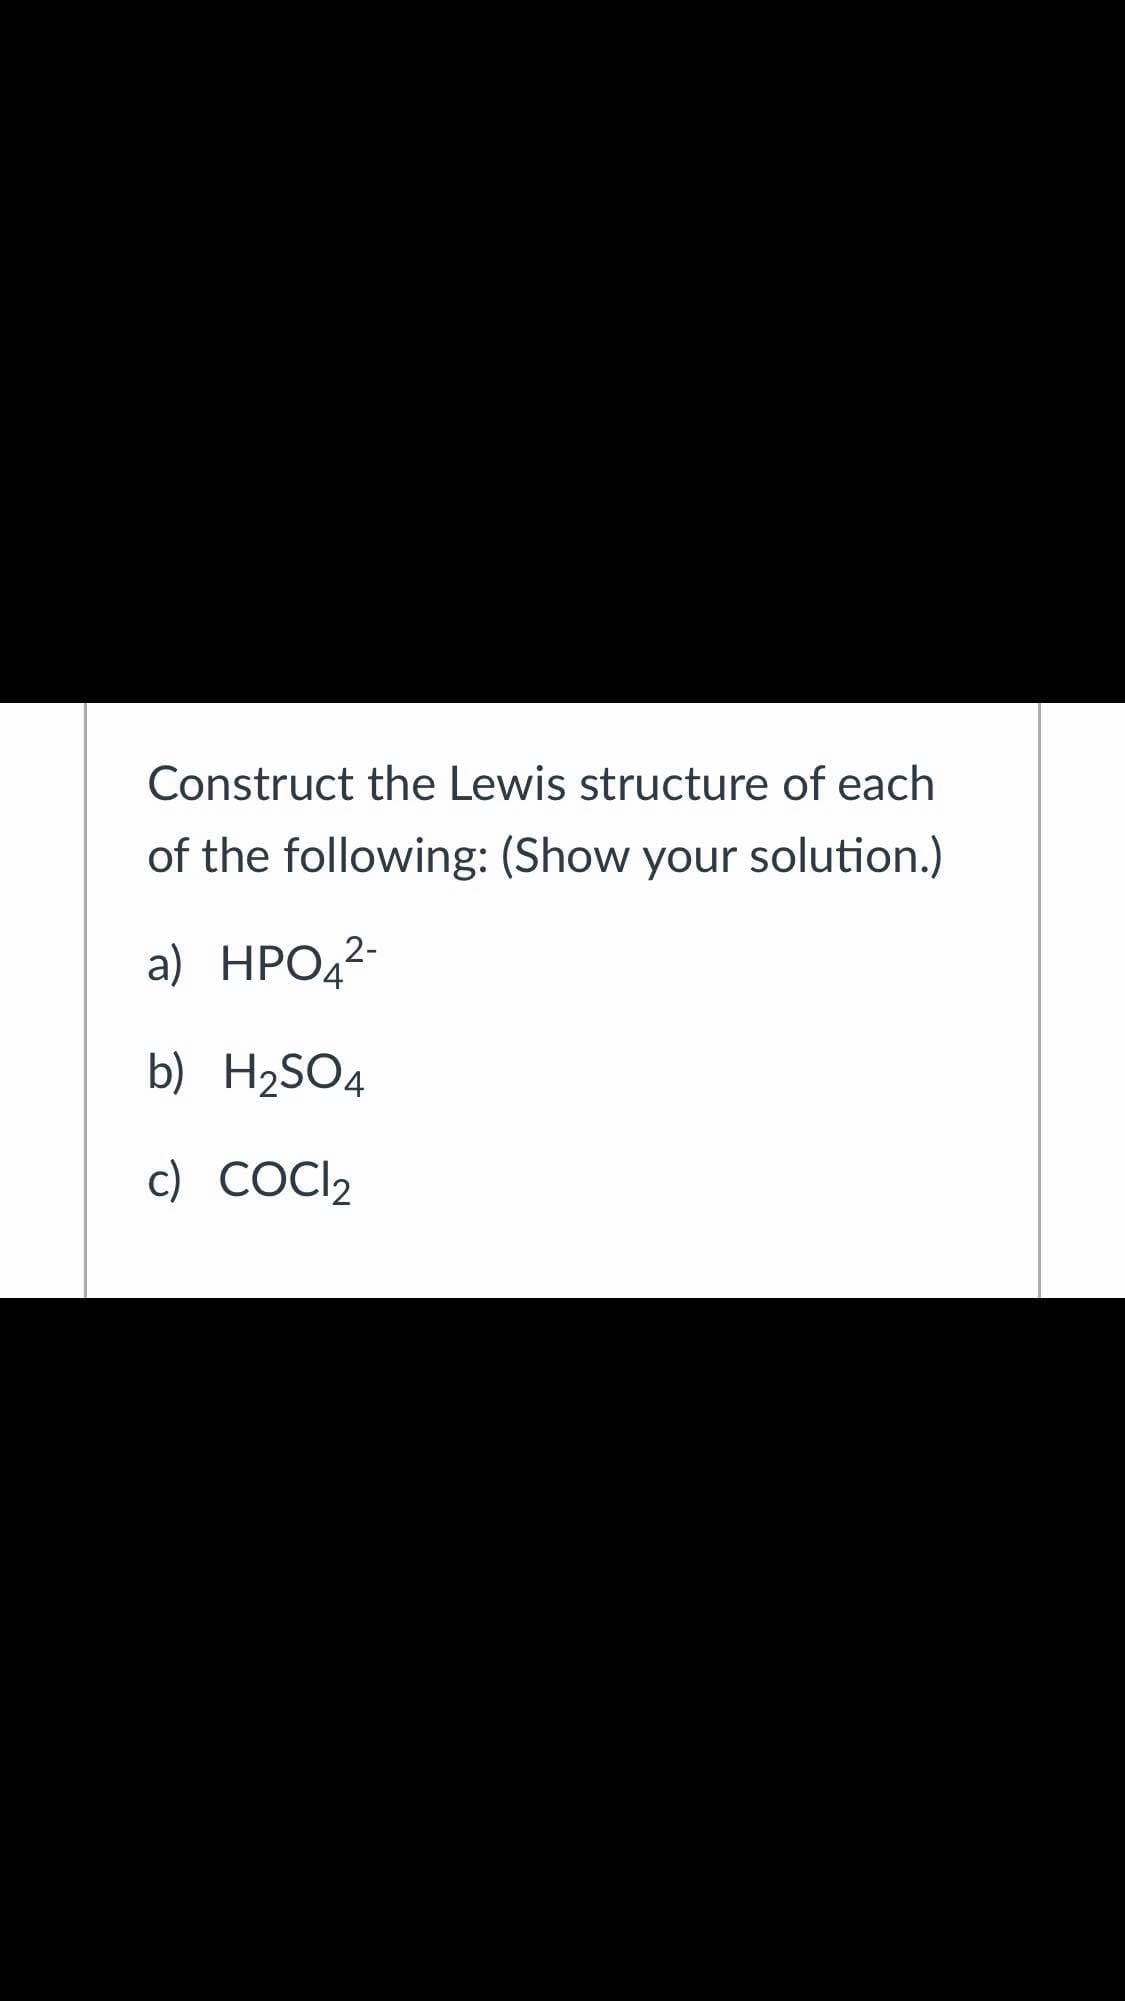 Construct the Lewis structure of each
of the following: (Show your solution.)
a) HPO,2-
b) H2SO4
c) COCI2
